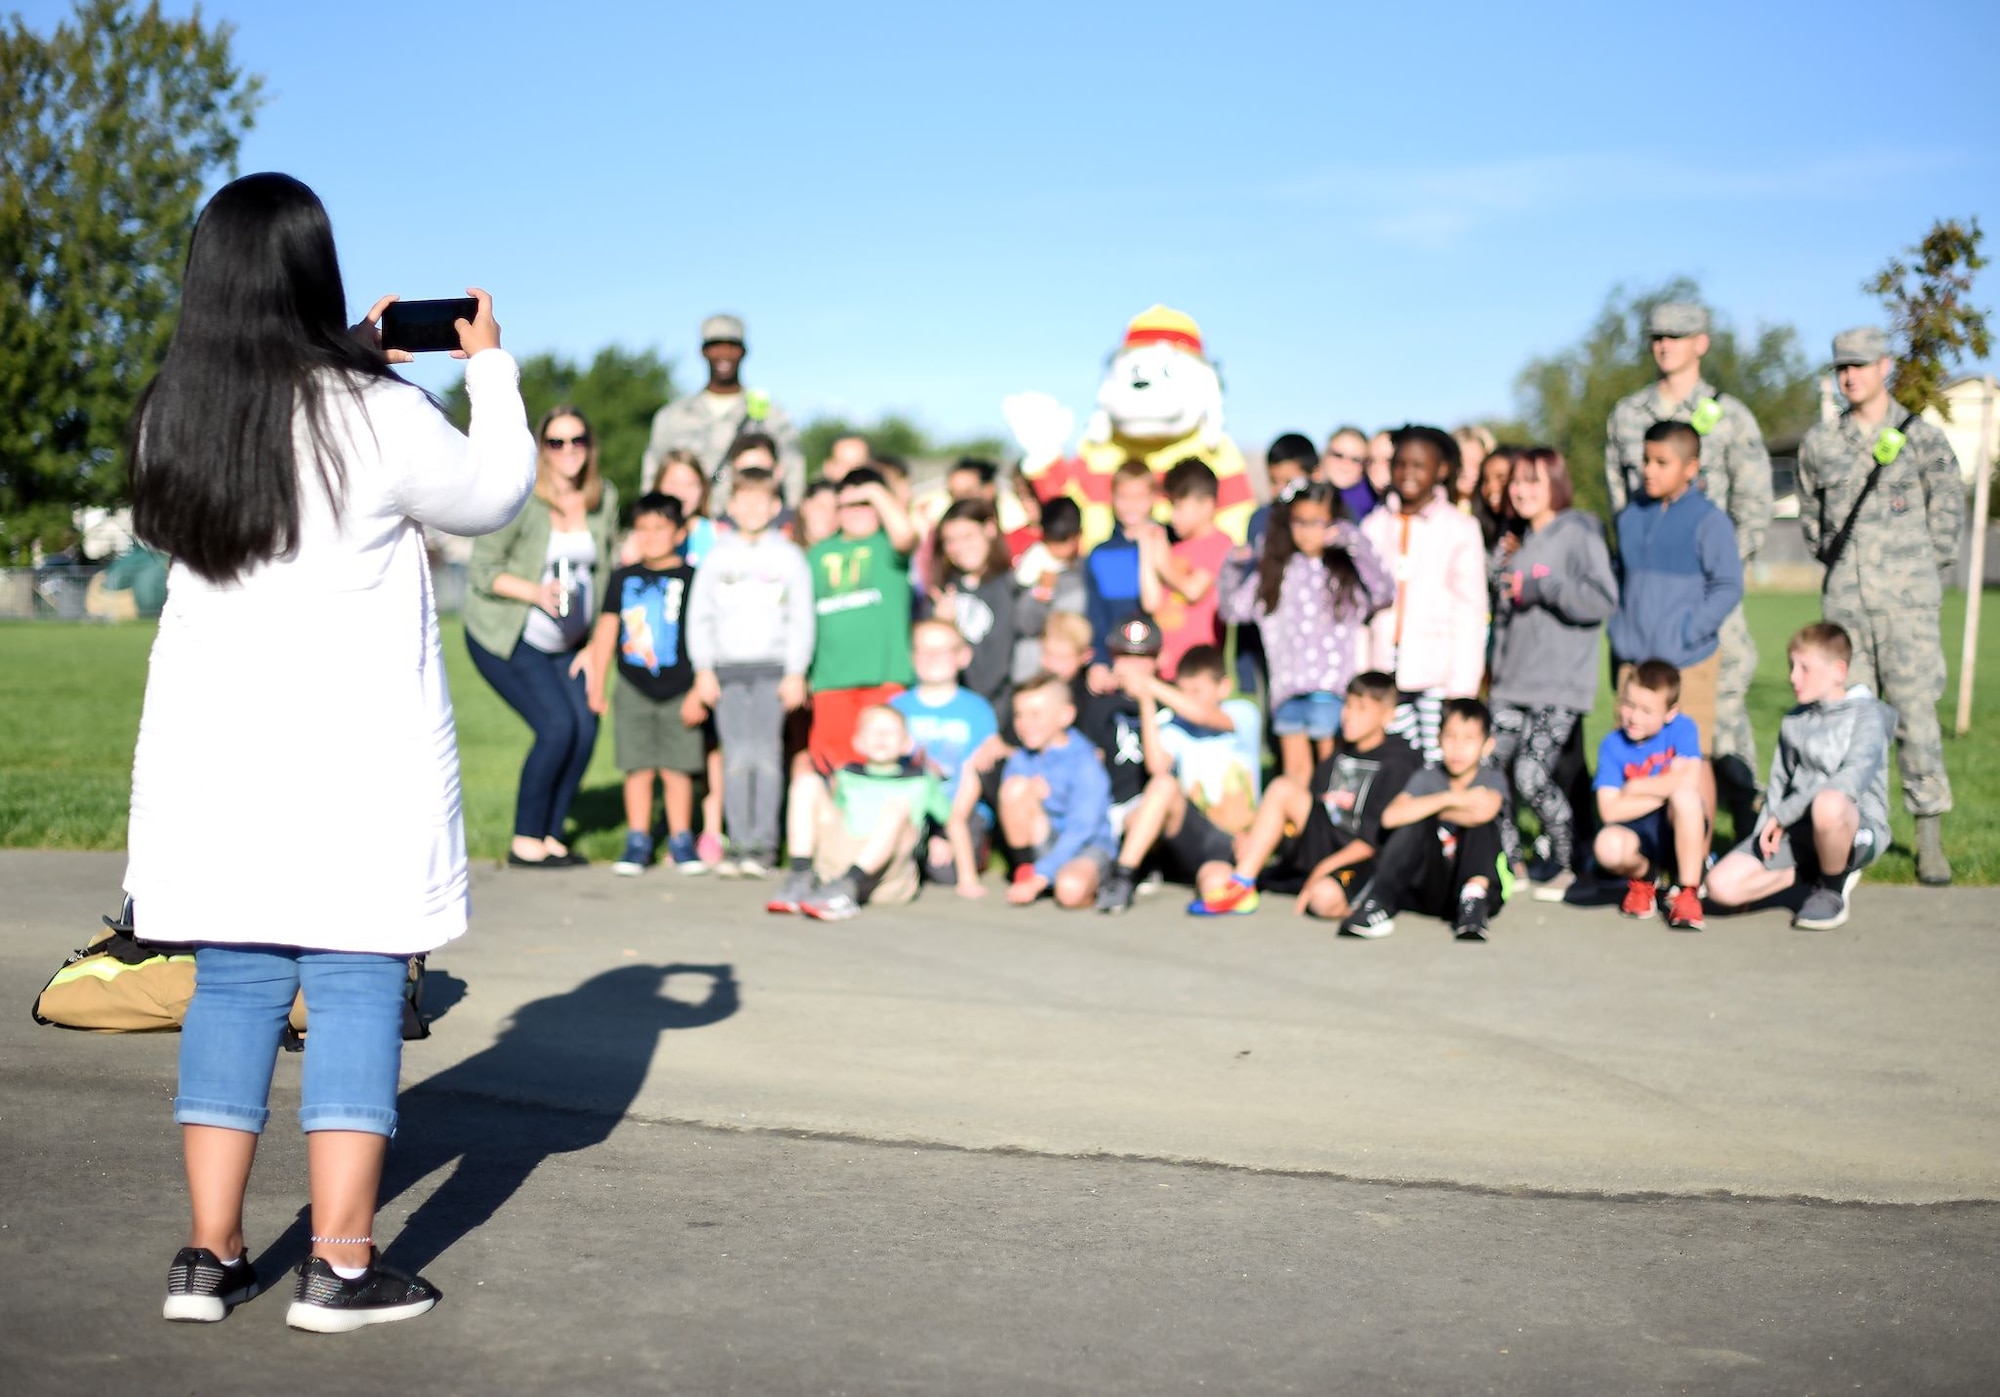 Grade school-aged children sit and stand among uniformed members of the Air Force along with Sparky the Fire Dog, a mascot for Fire Prevention Week, and pose for a photo taken by a smartphone.